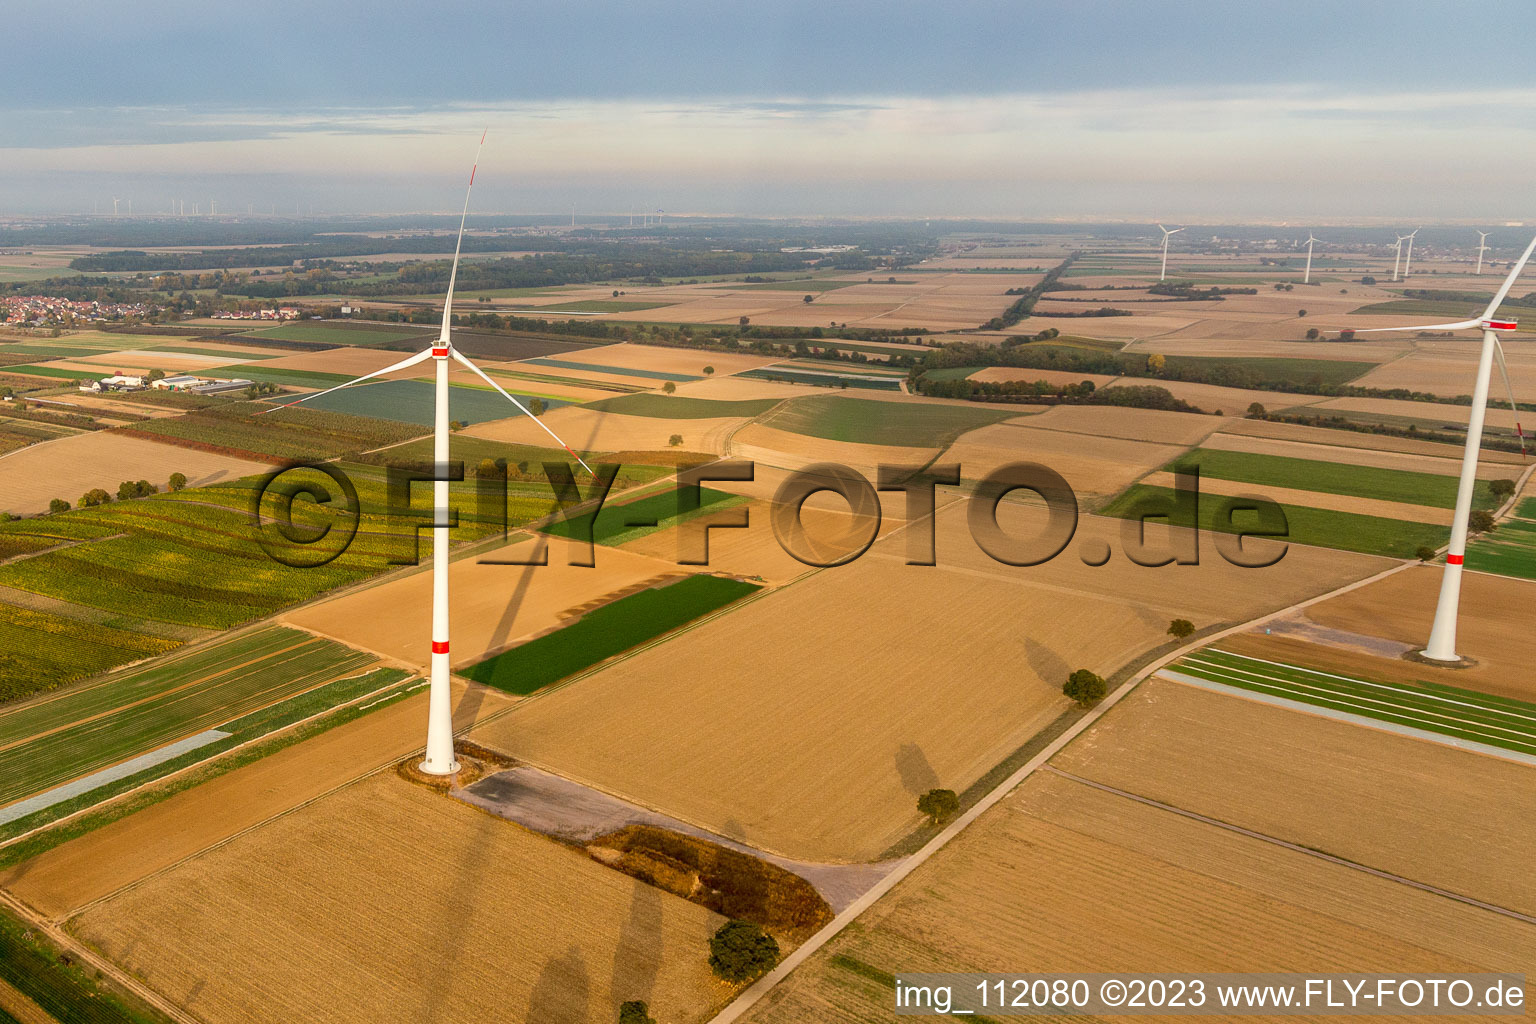 EnBW wind farm - wind turbine with 6 wind turbines in Freckenfeld in the state Rhineland-Palatinate, Germany from a drone